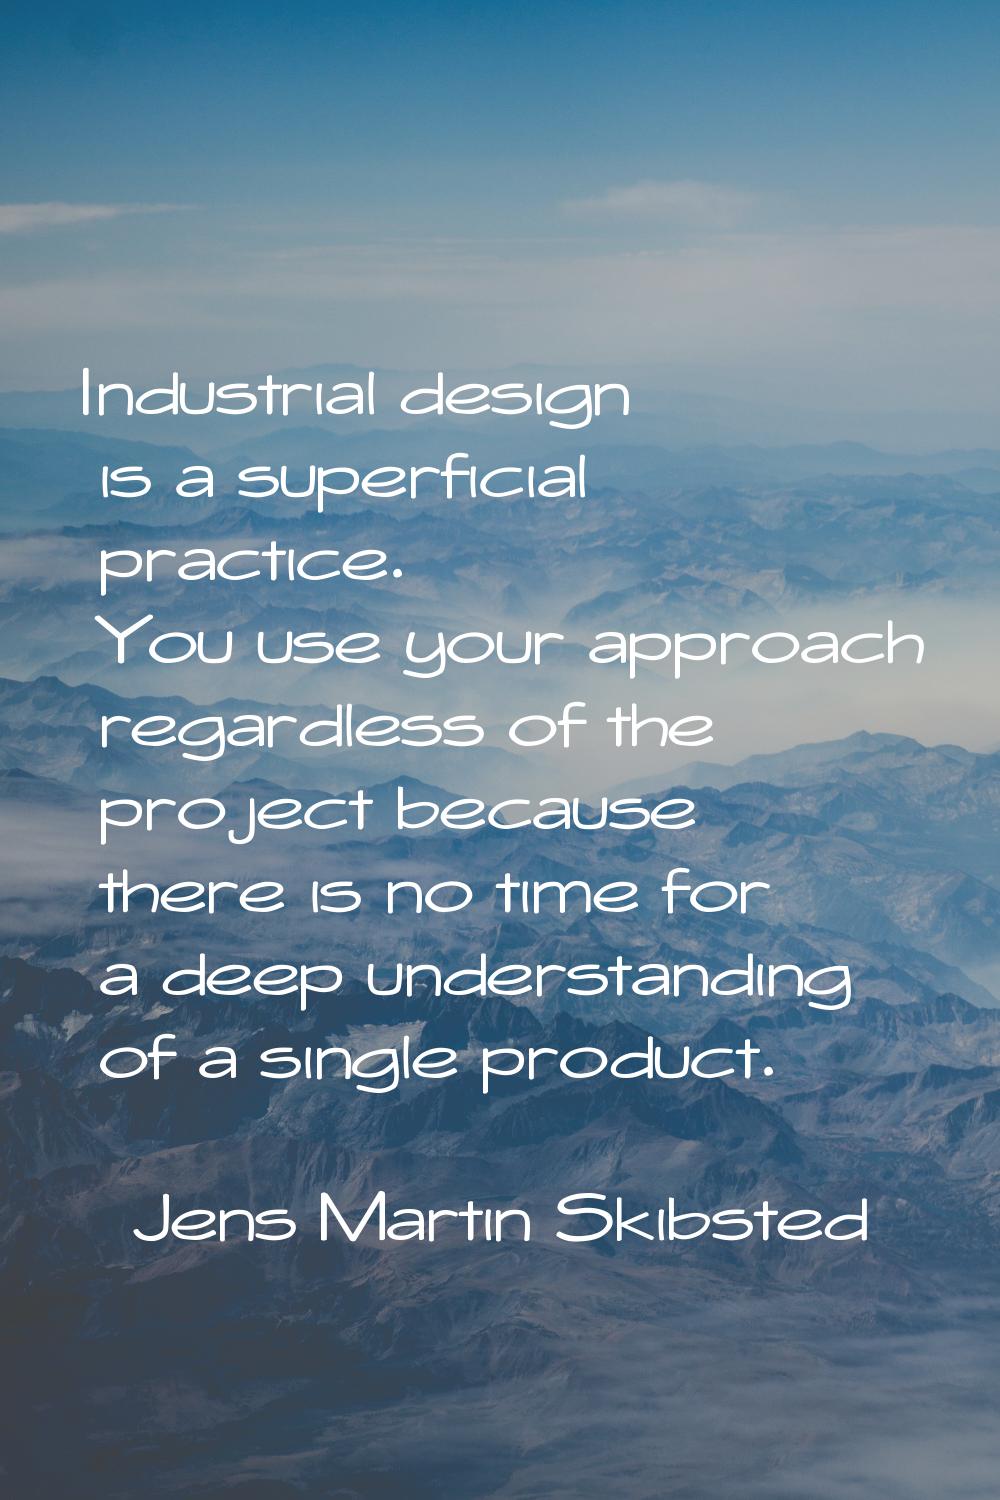 Industrial design is a superficial practice. You use your approach regardless of the project becaus